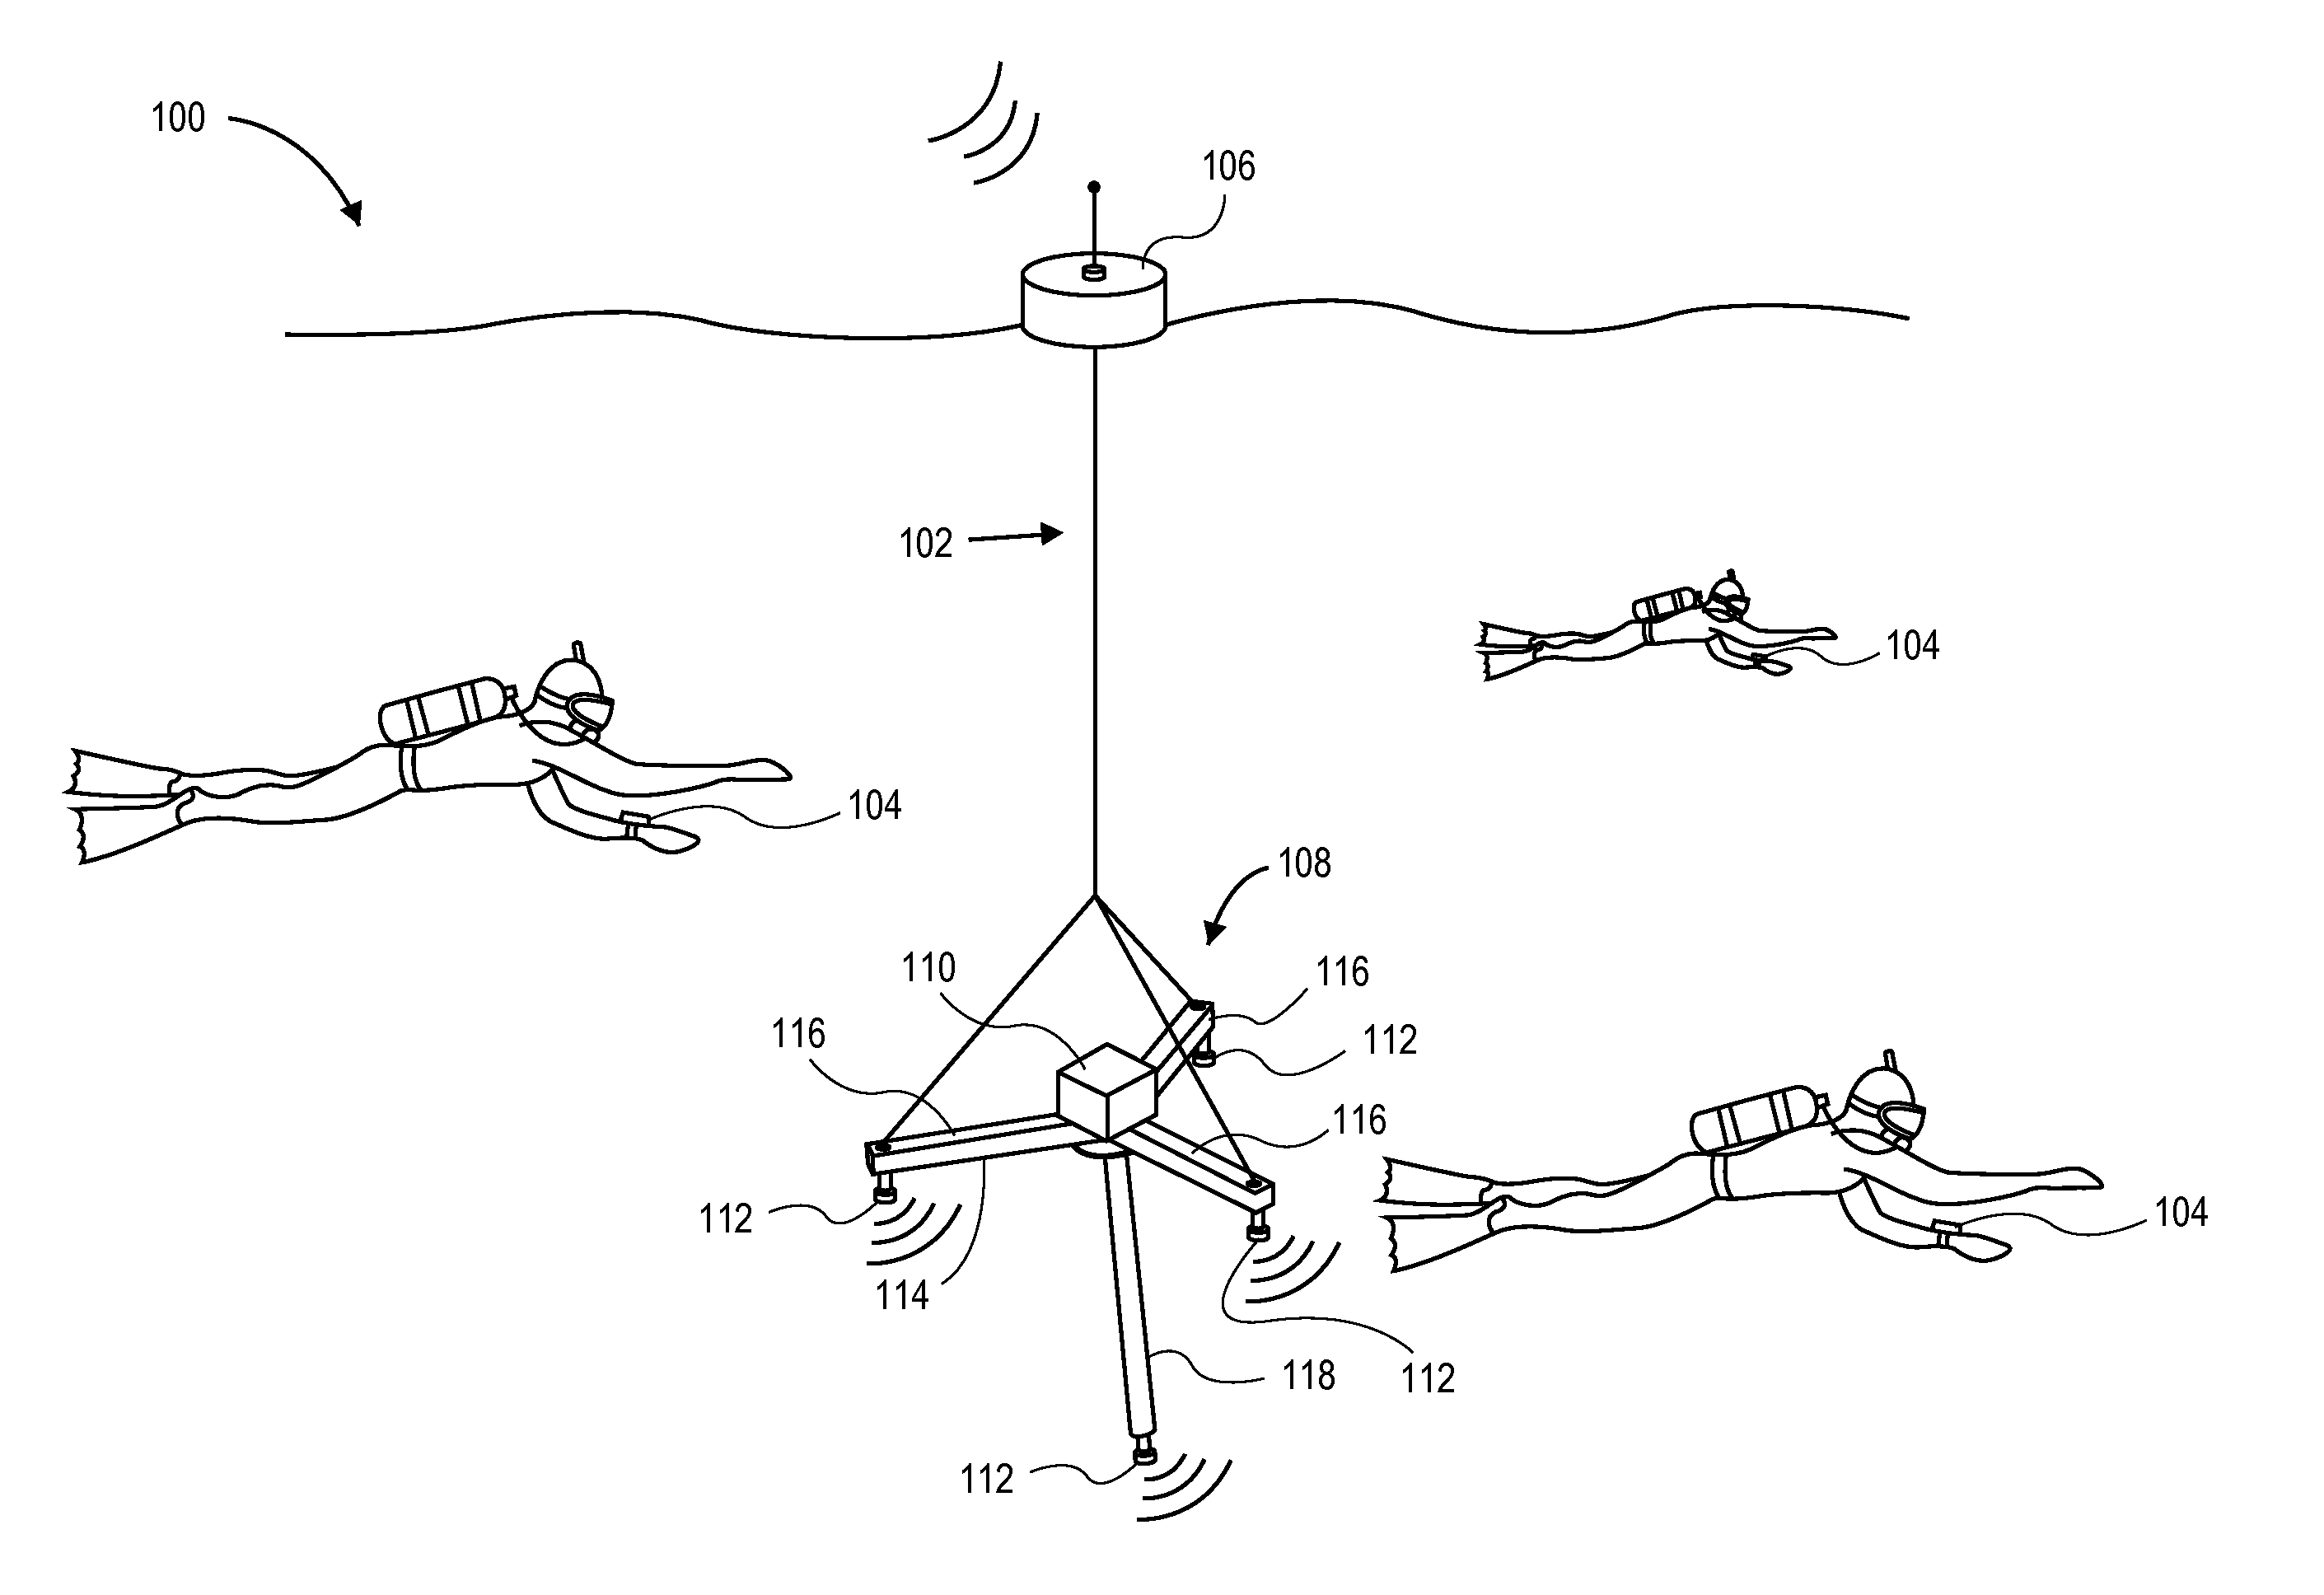 Underwater acoustic navigation systems and methods